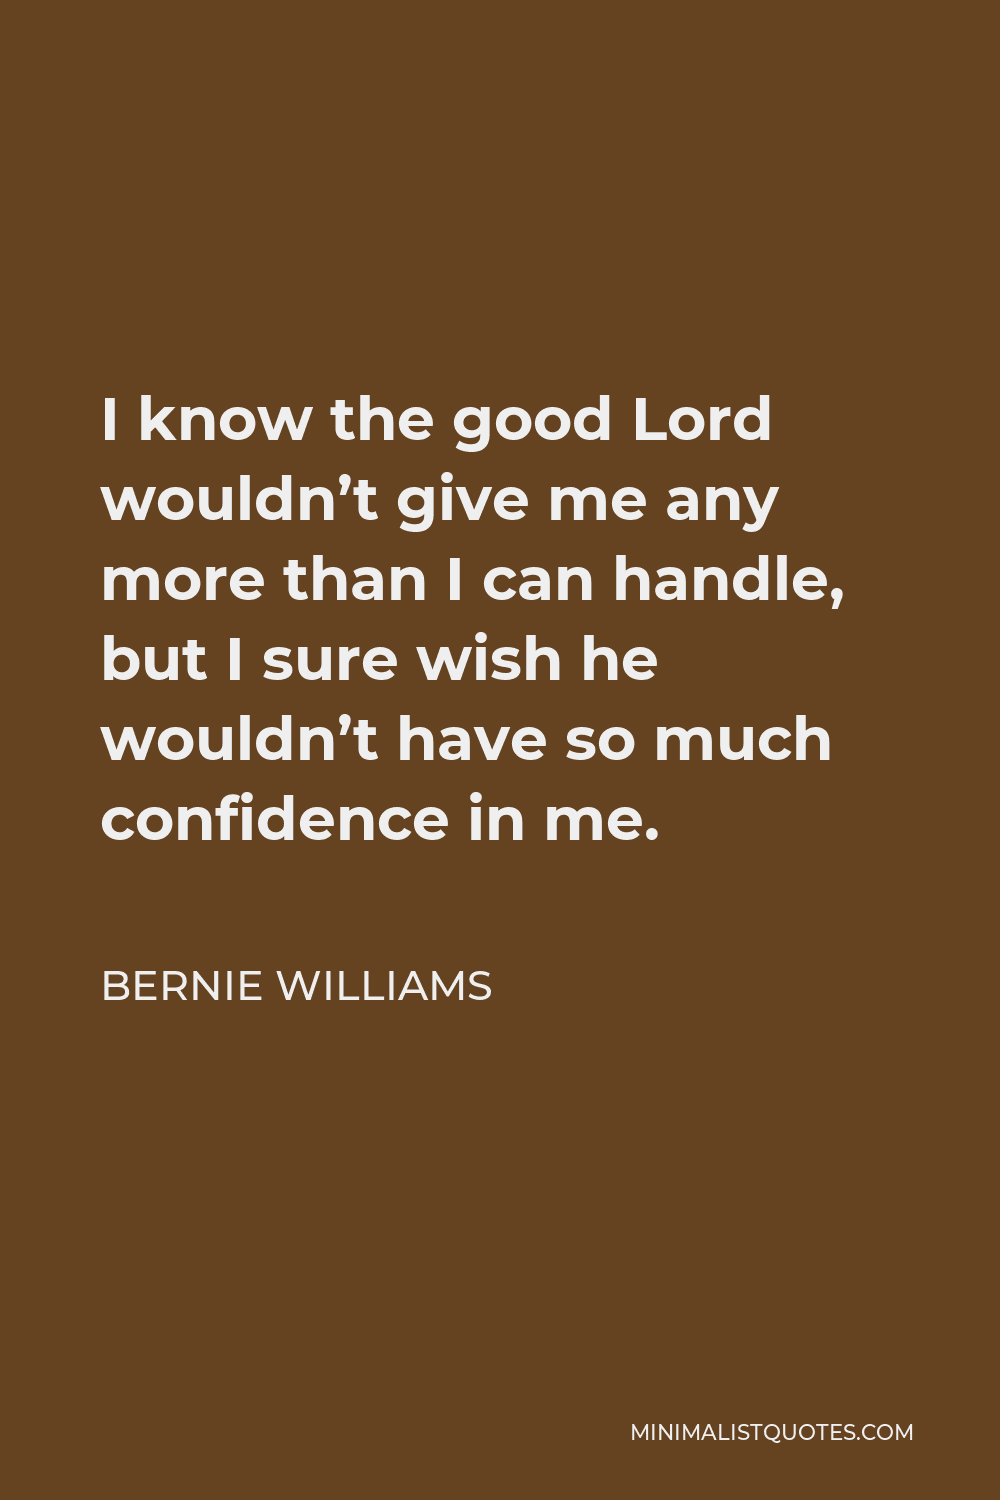 Bernie Williams Quote - I know the good Lord wouldn’t give me any more than I can handle, but I sure wish he wouldn’t have so much confidence in me.